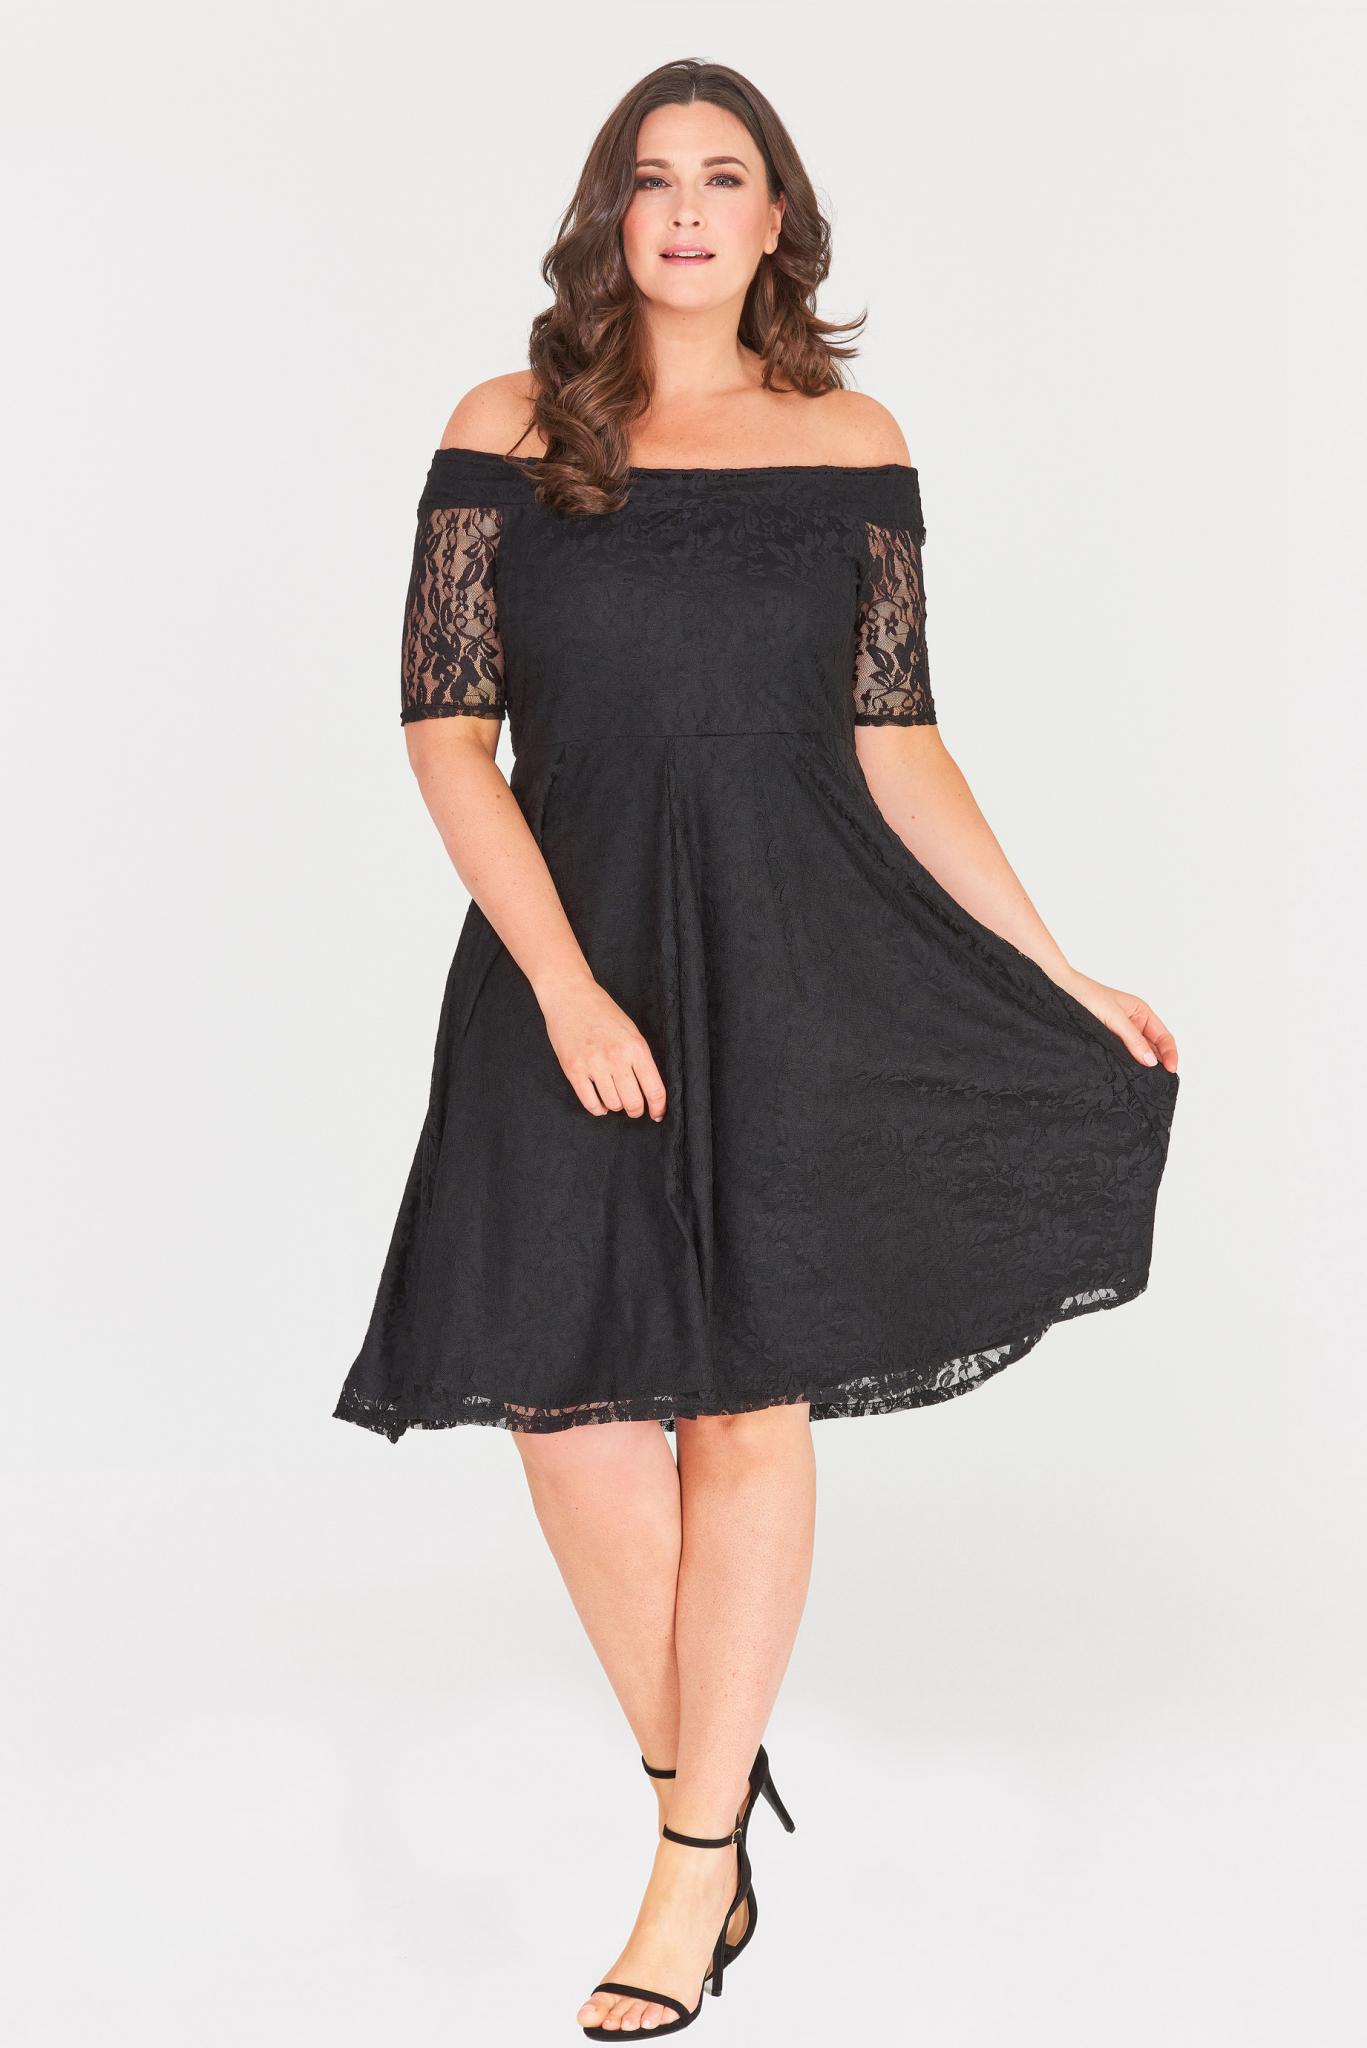 Womens Plus Size Clothing | Piara Waters | Perth ...